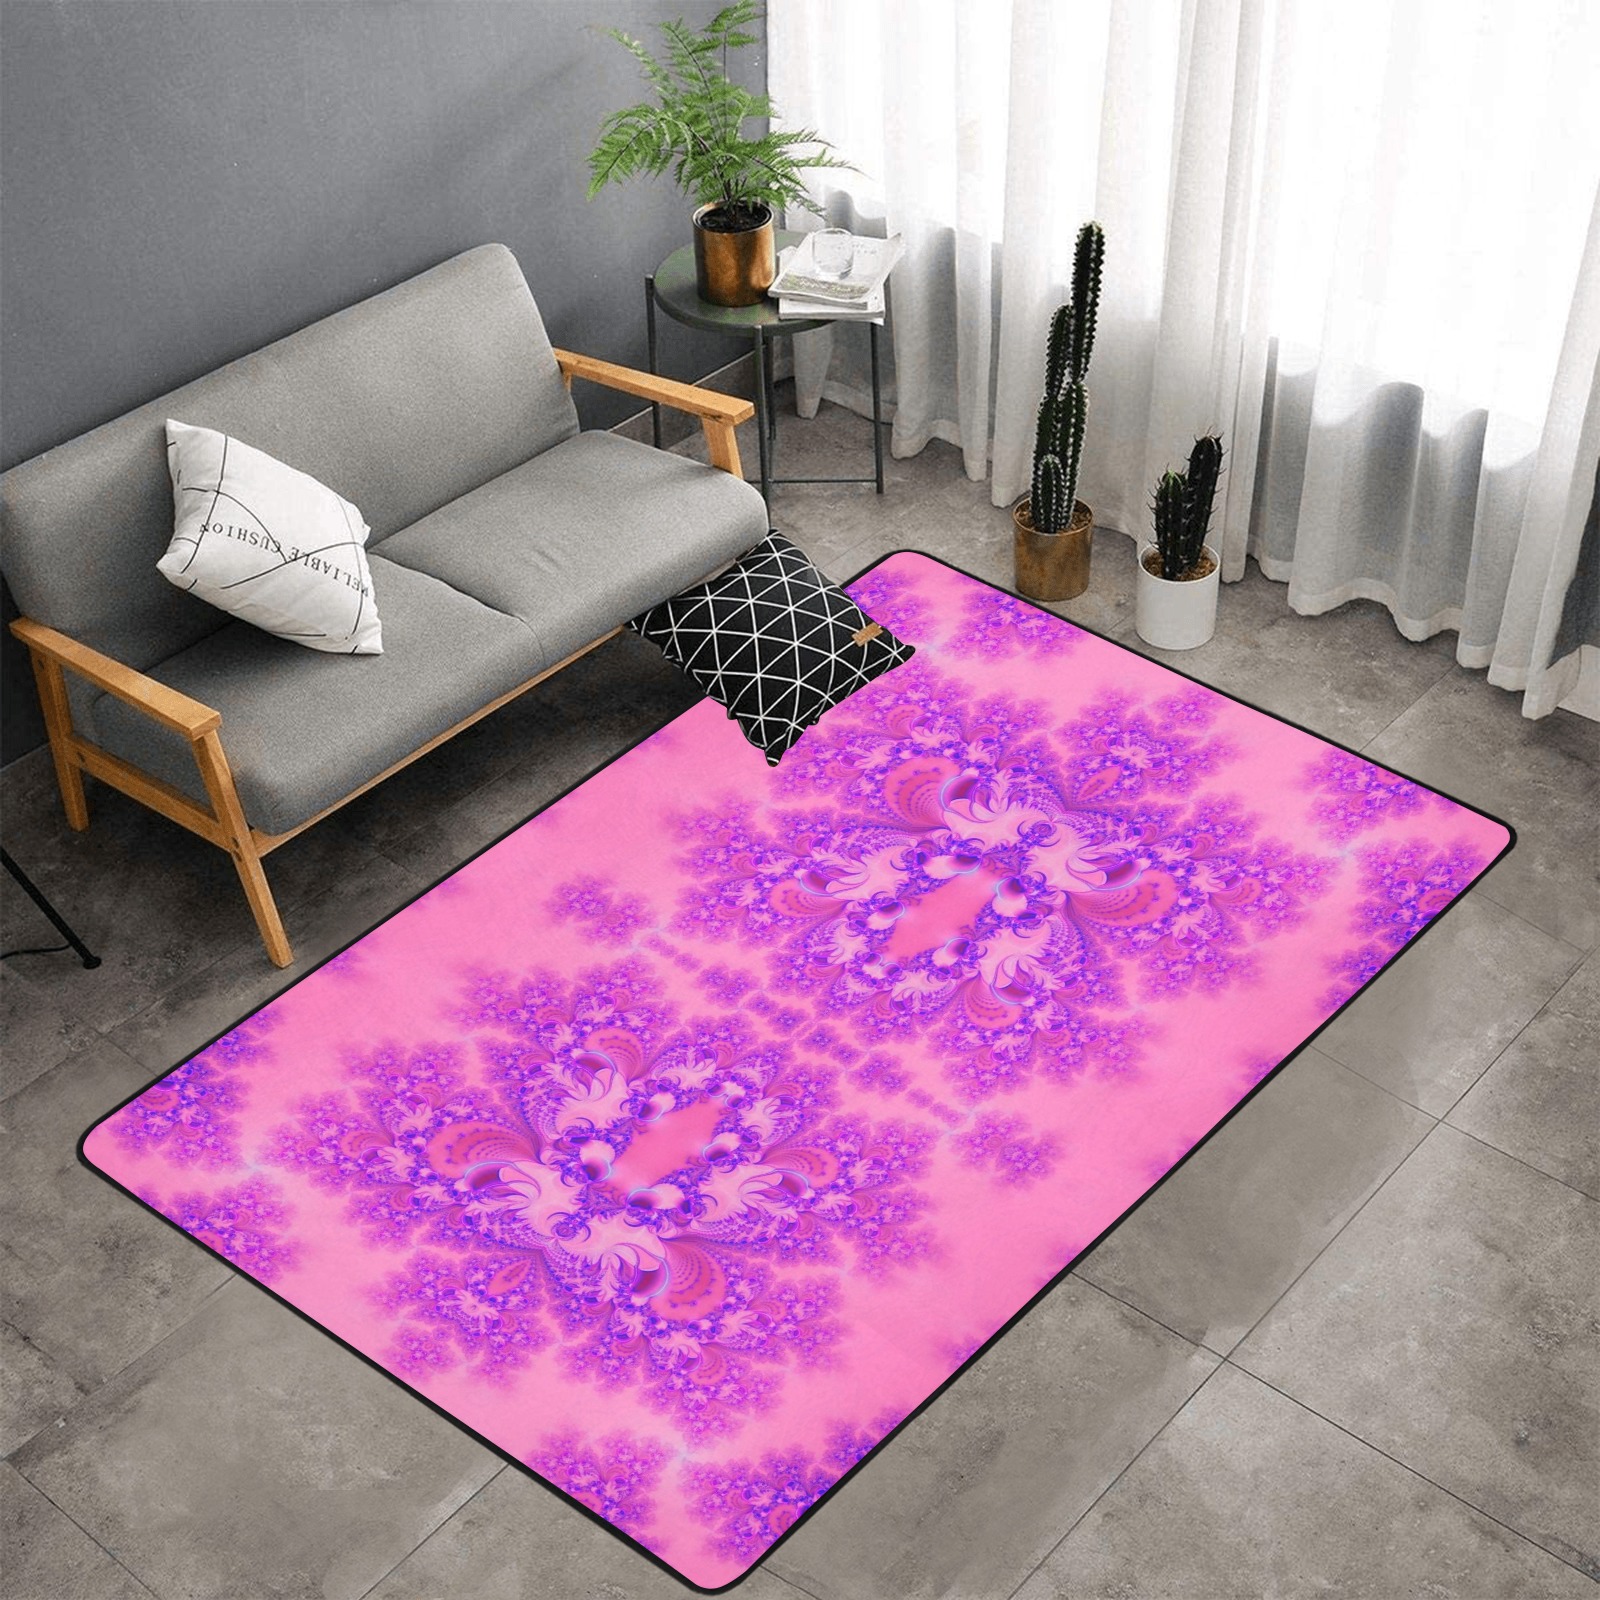 Purple and Pink Hydrangeas Frost Fractal Area Rug with Black Binding 7'x5'